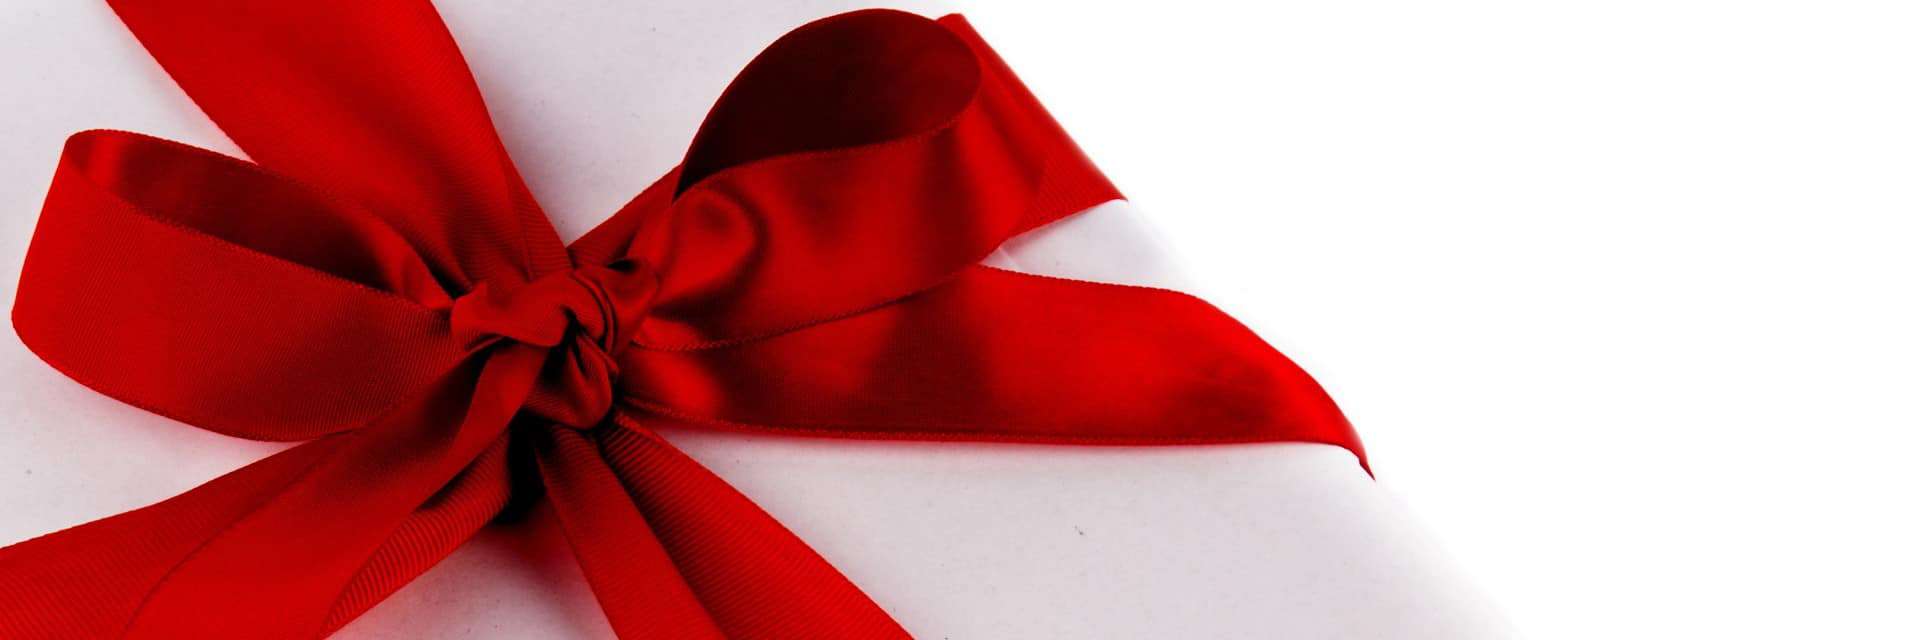 Photo of a red bow on a white gift box